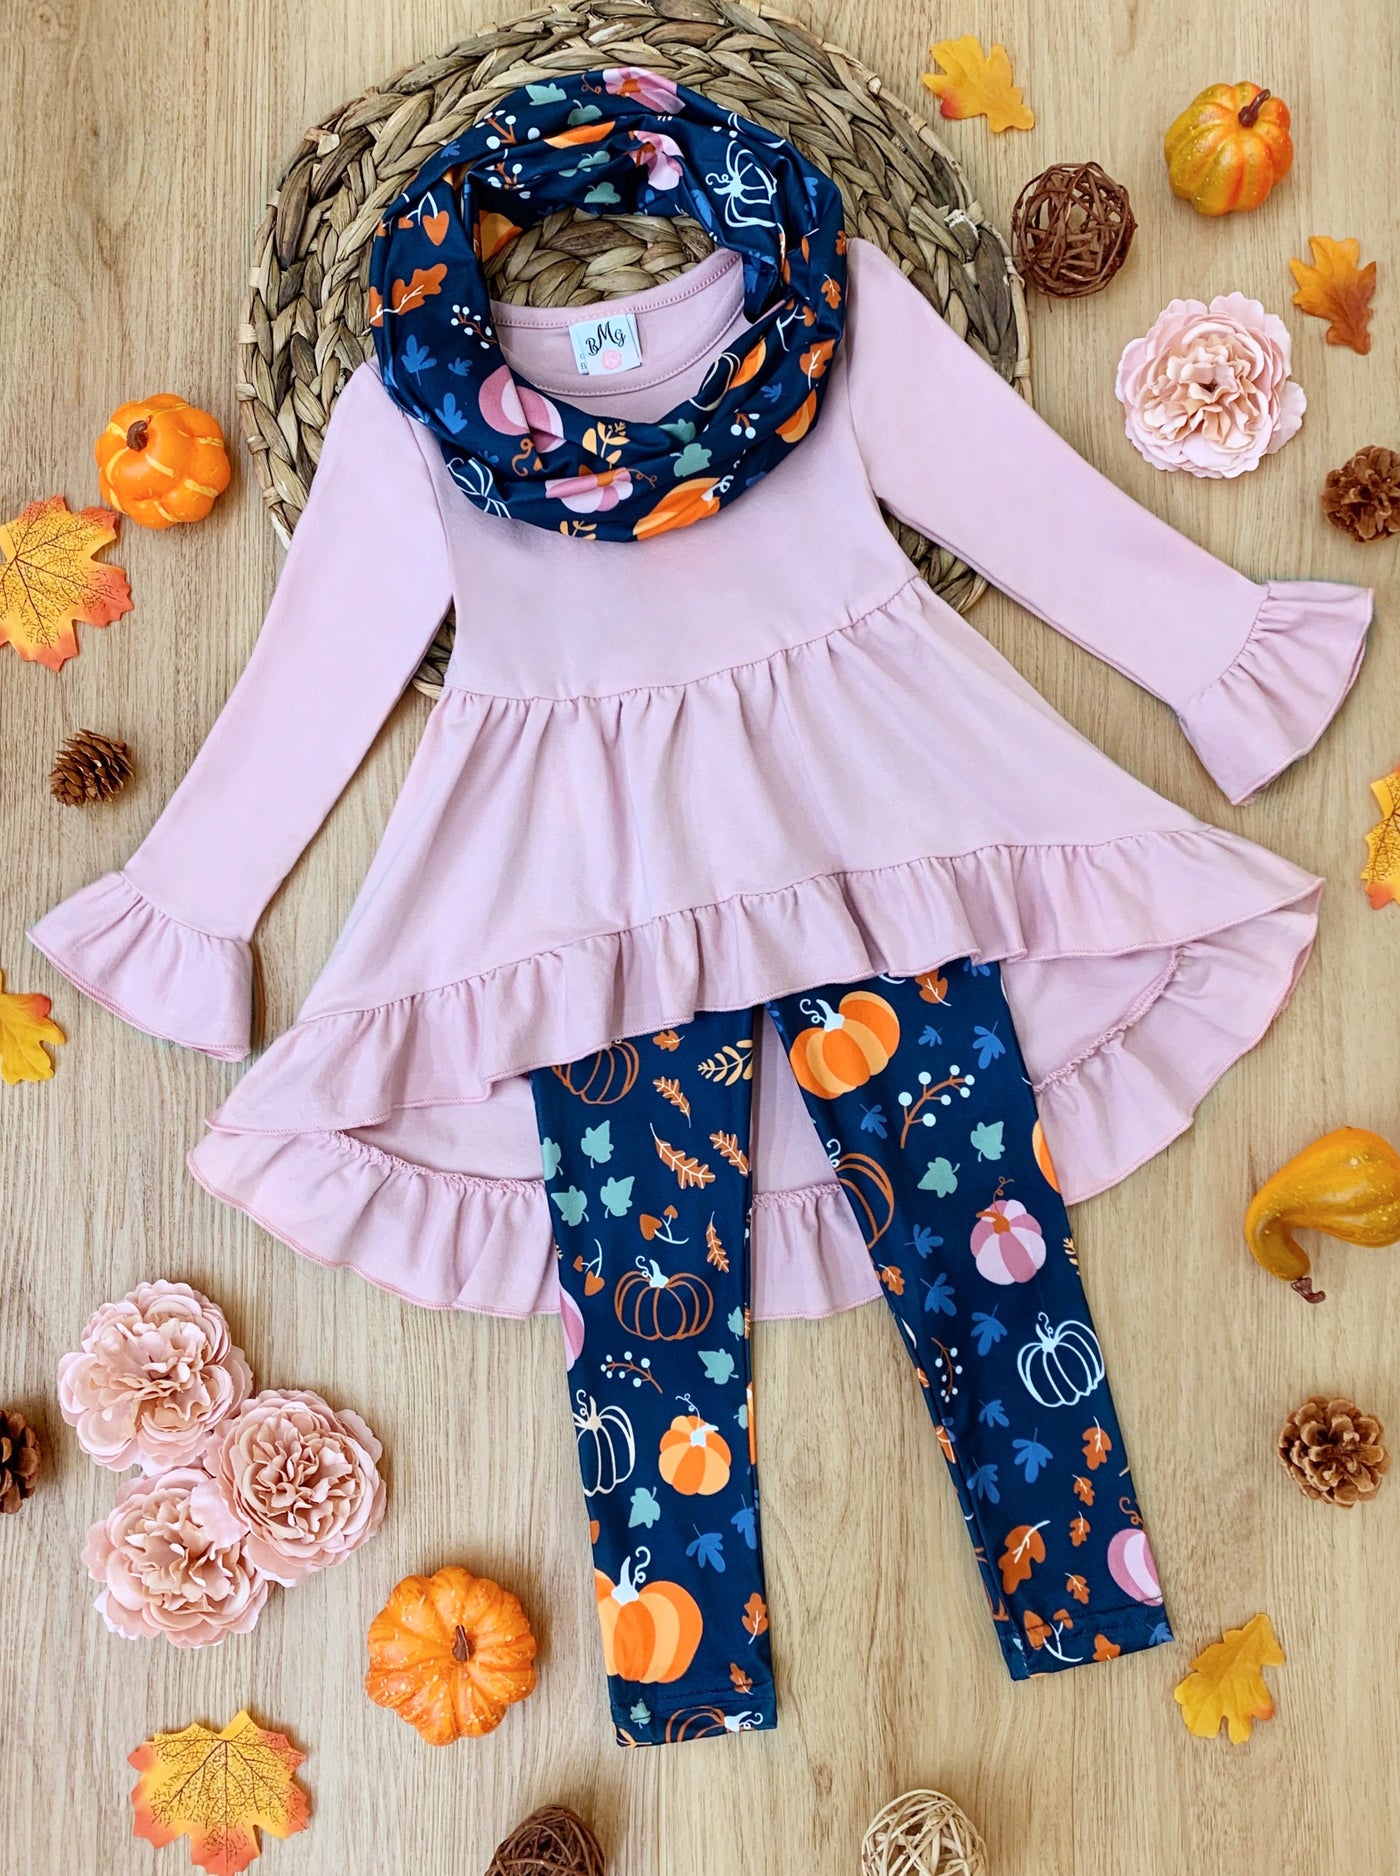 Little girls long-sleeve hi-lo tunic with ruffle cuffs and hem, pumpkin print leggings, and a matching infinity wrap scarf - Mia Belle Girls